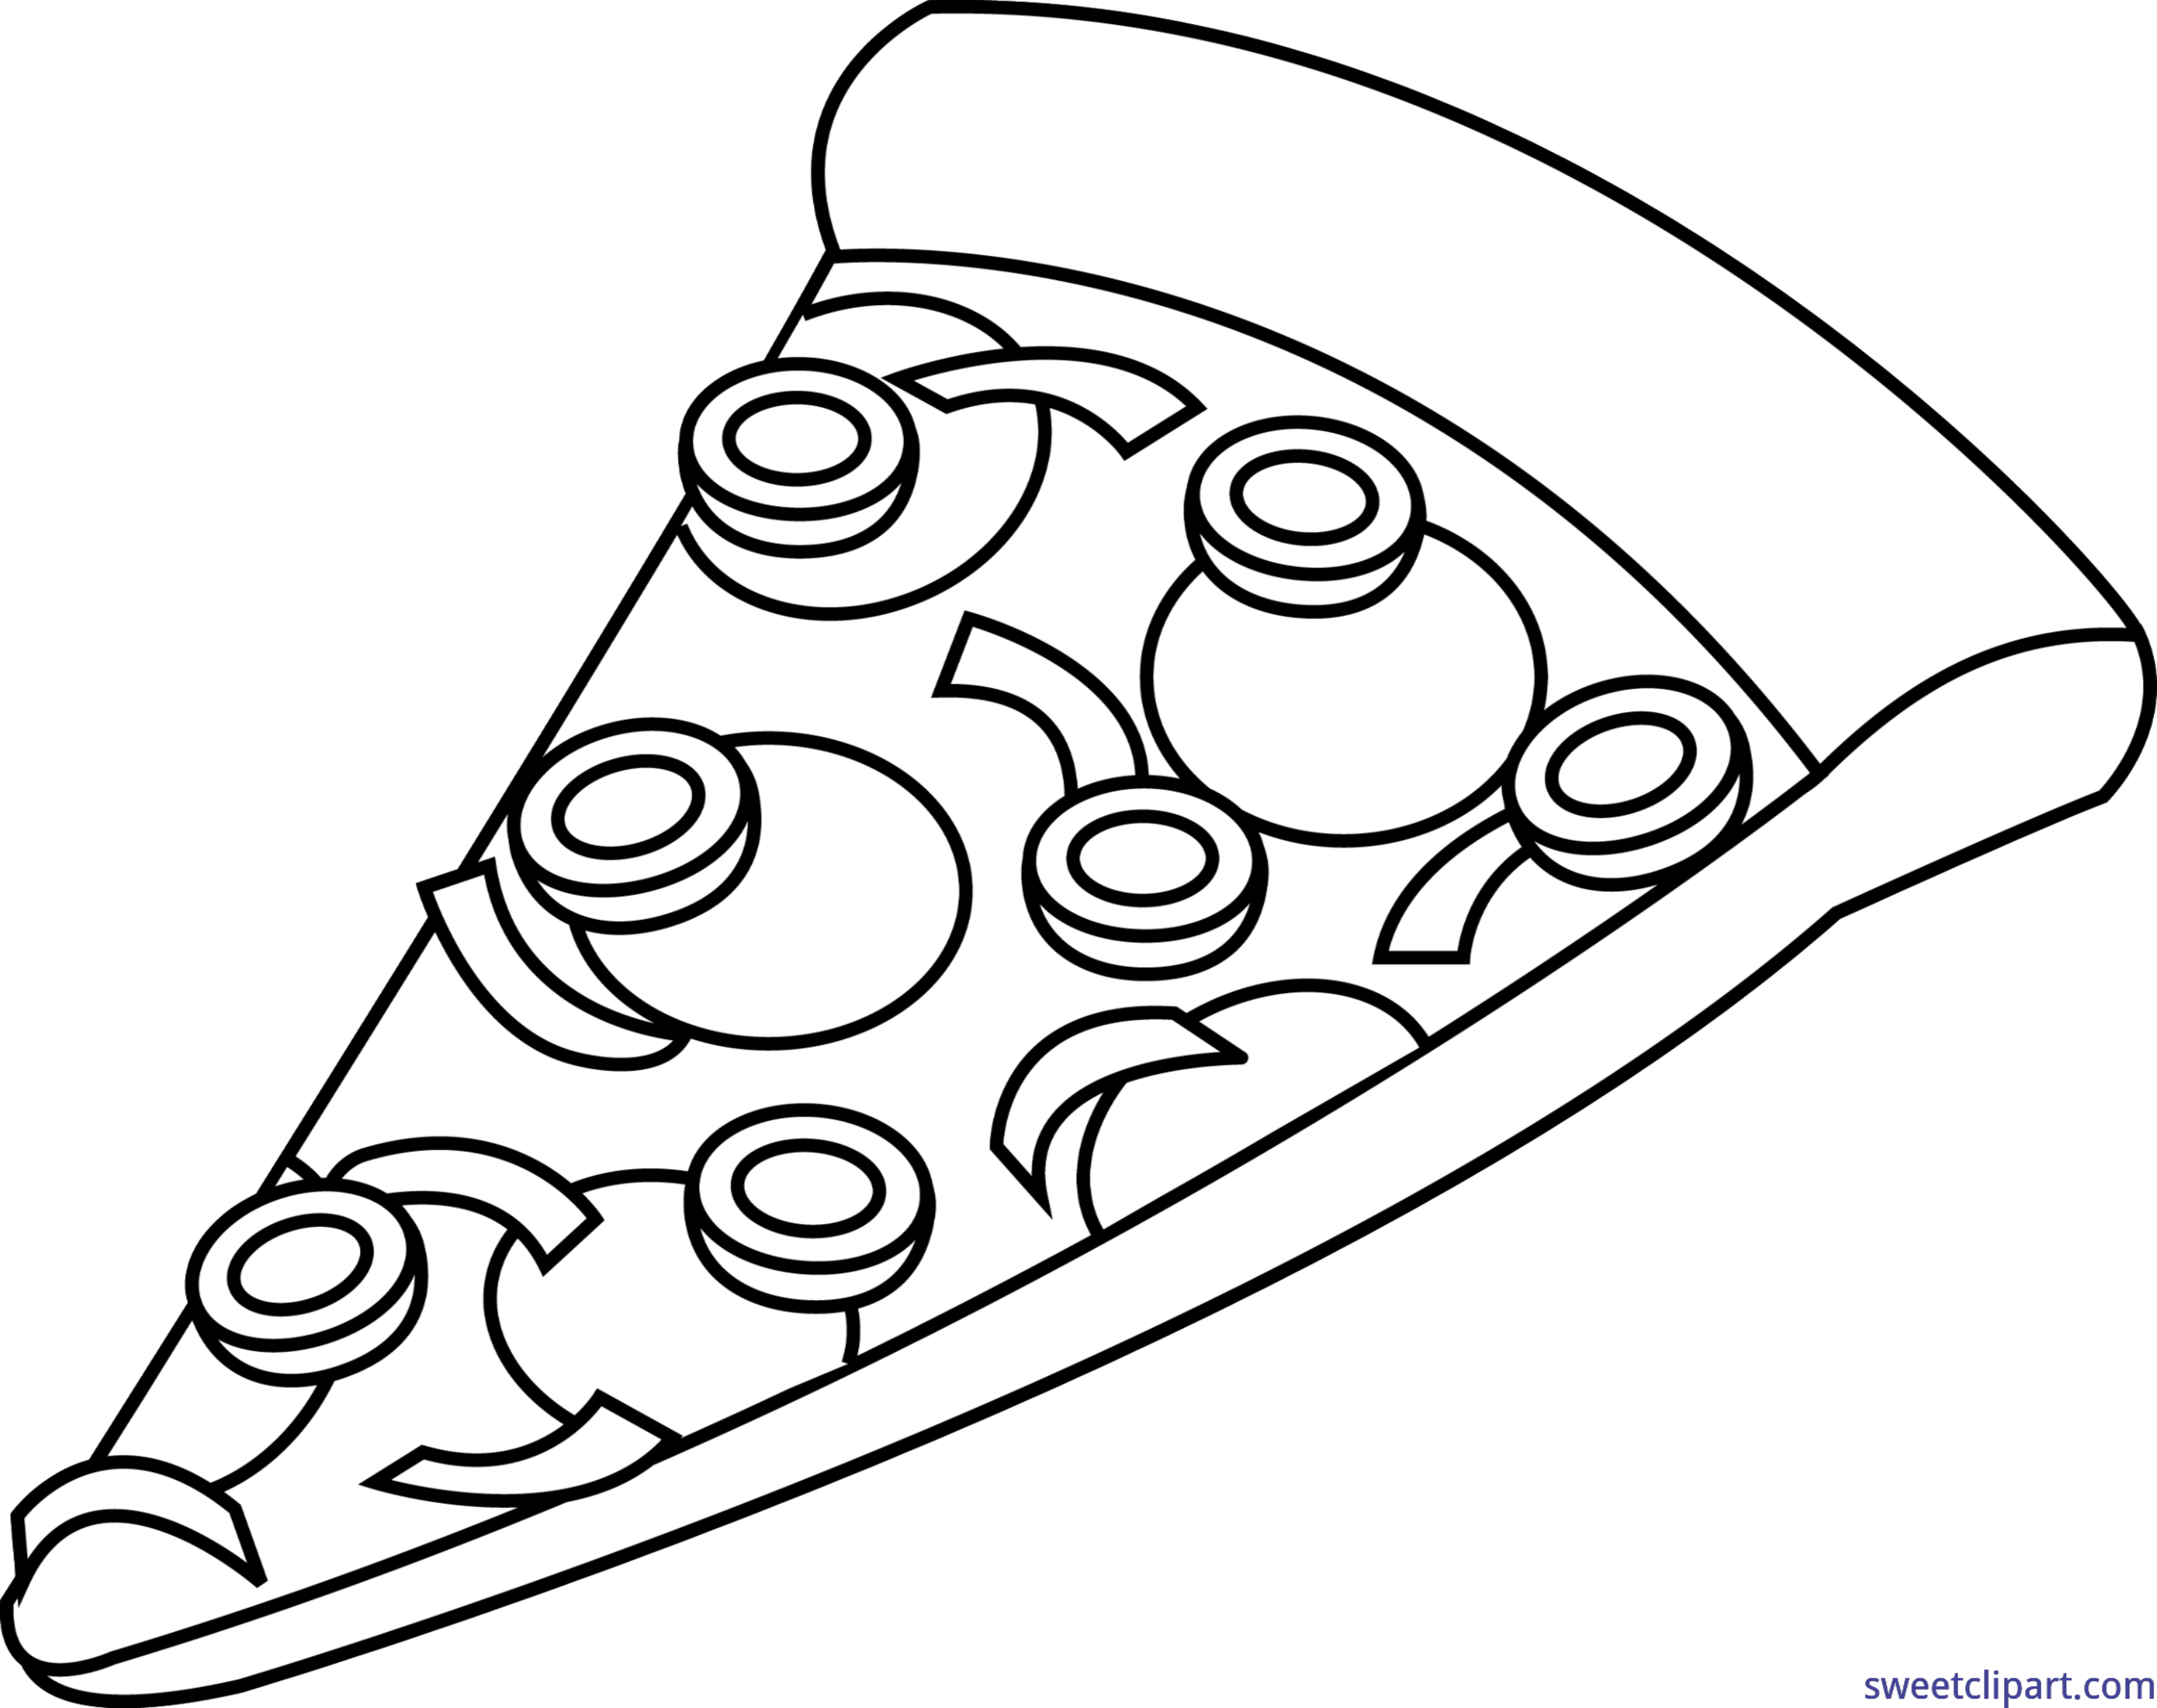 A Black And White Drawing Of A Slice Of Pizza